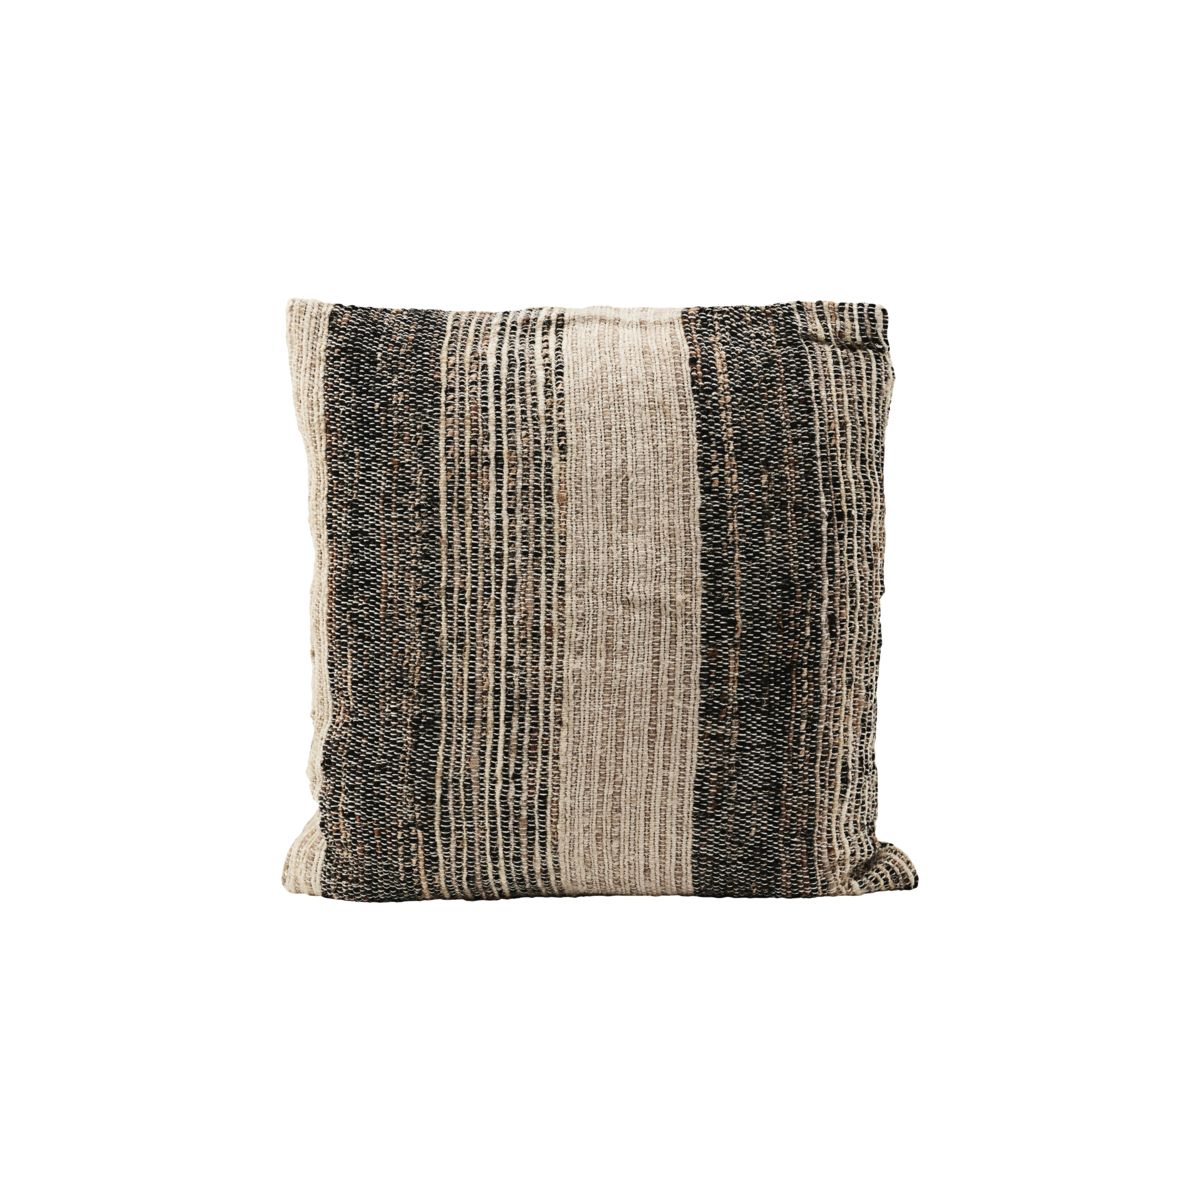 House Doctor Cushion Cover 50x50cm Viscose/Cotton with Stripes in Earth Tones